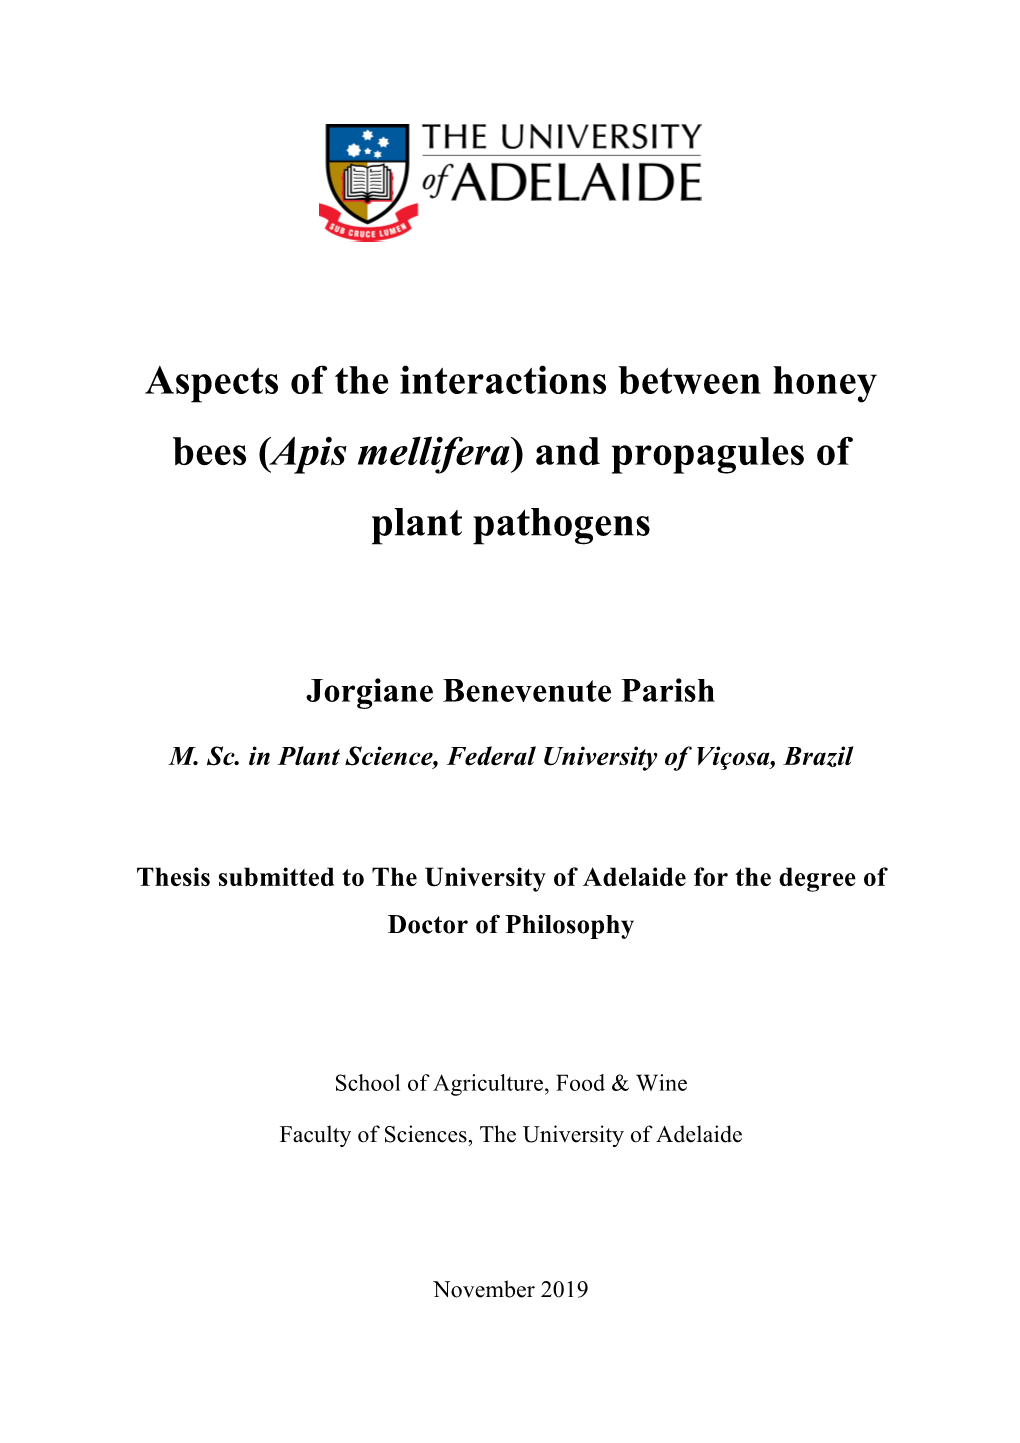 Aspects of the Interactions Between Honey Bees (Apis Mellifera) and Propagules of Plant Pathogens